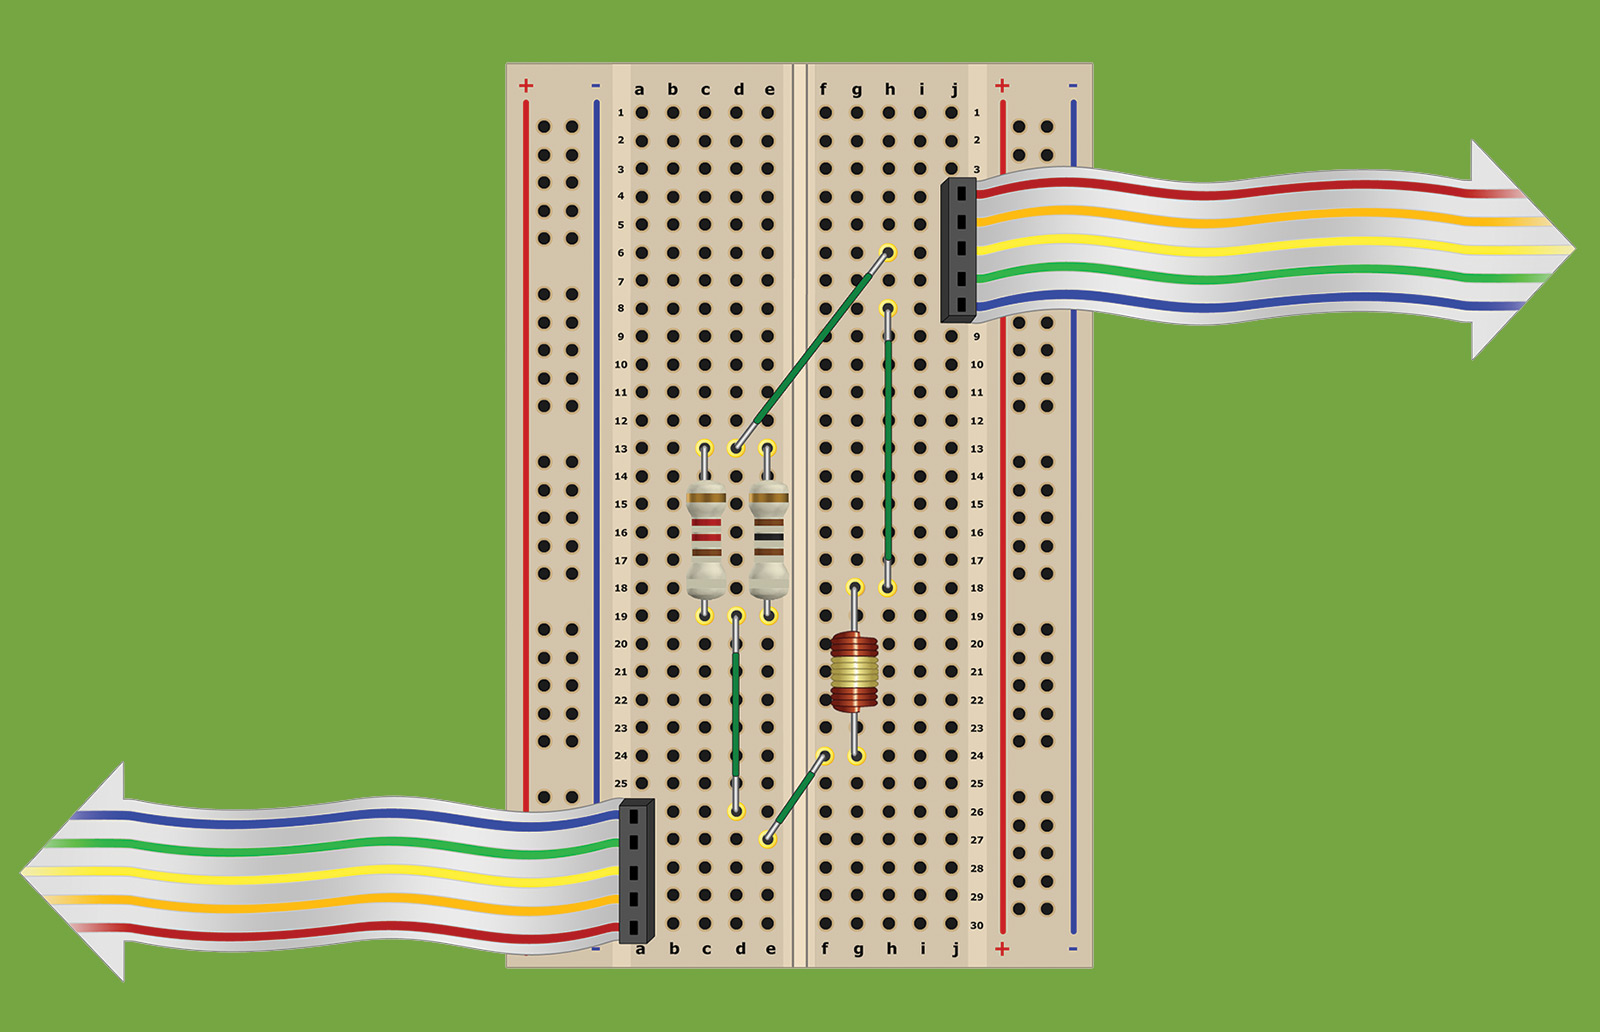 The breadboards of teammates are connected.